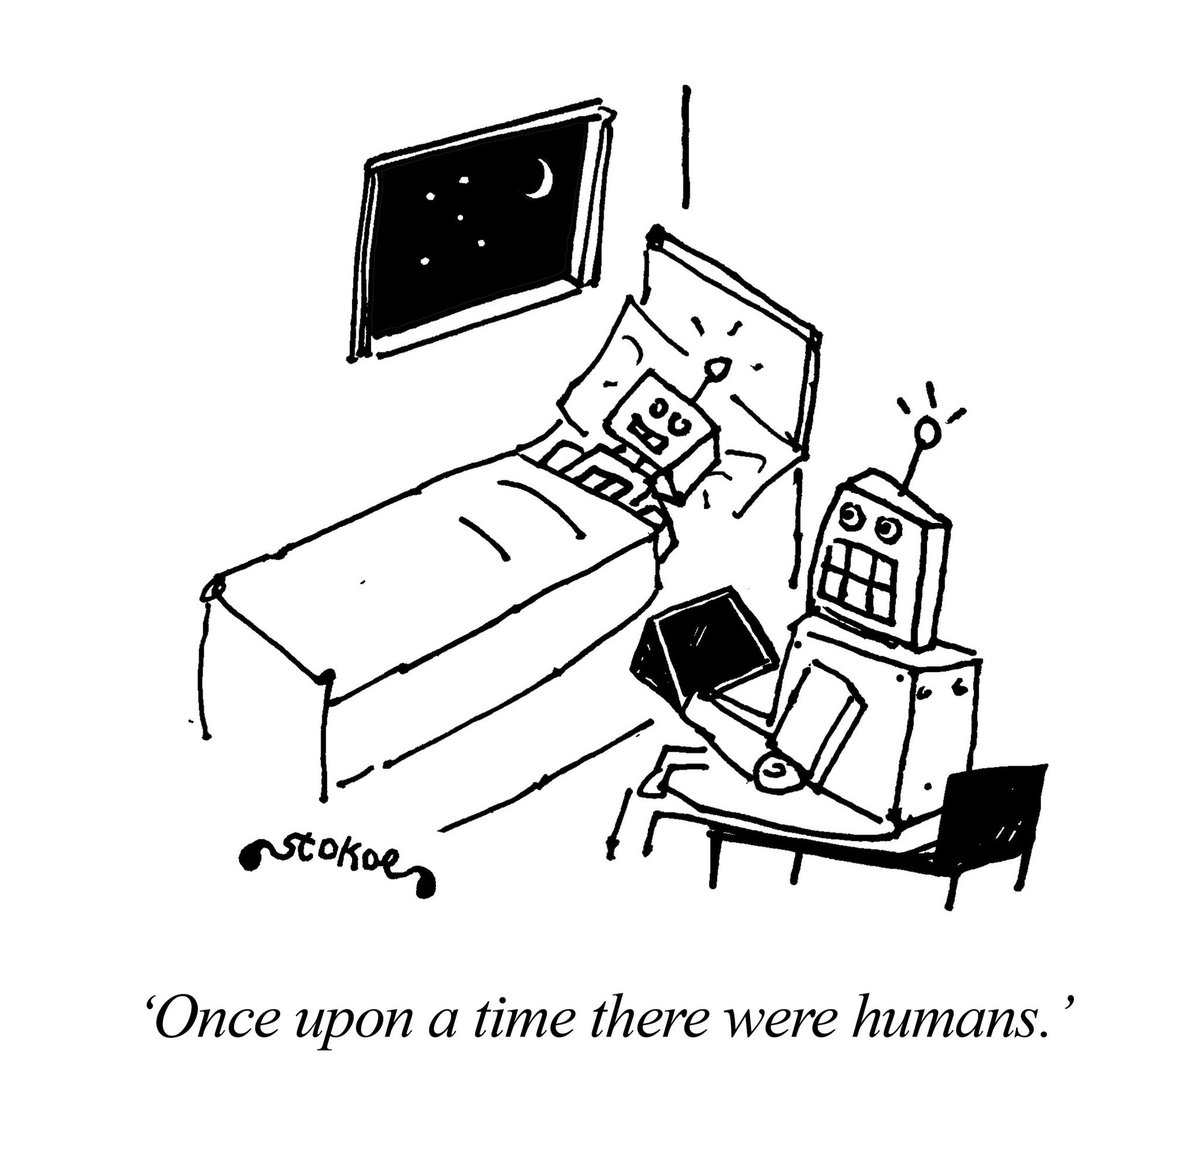 The Cartoon Oscar’s are here again! Vote for your favourite toon of the year! Here’s one of my entries, published in the Spectator … TO VOTE, click here: ellwoodatfield.com/vote-political… #cartoons #stokoecartoons #Ai